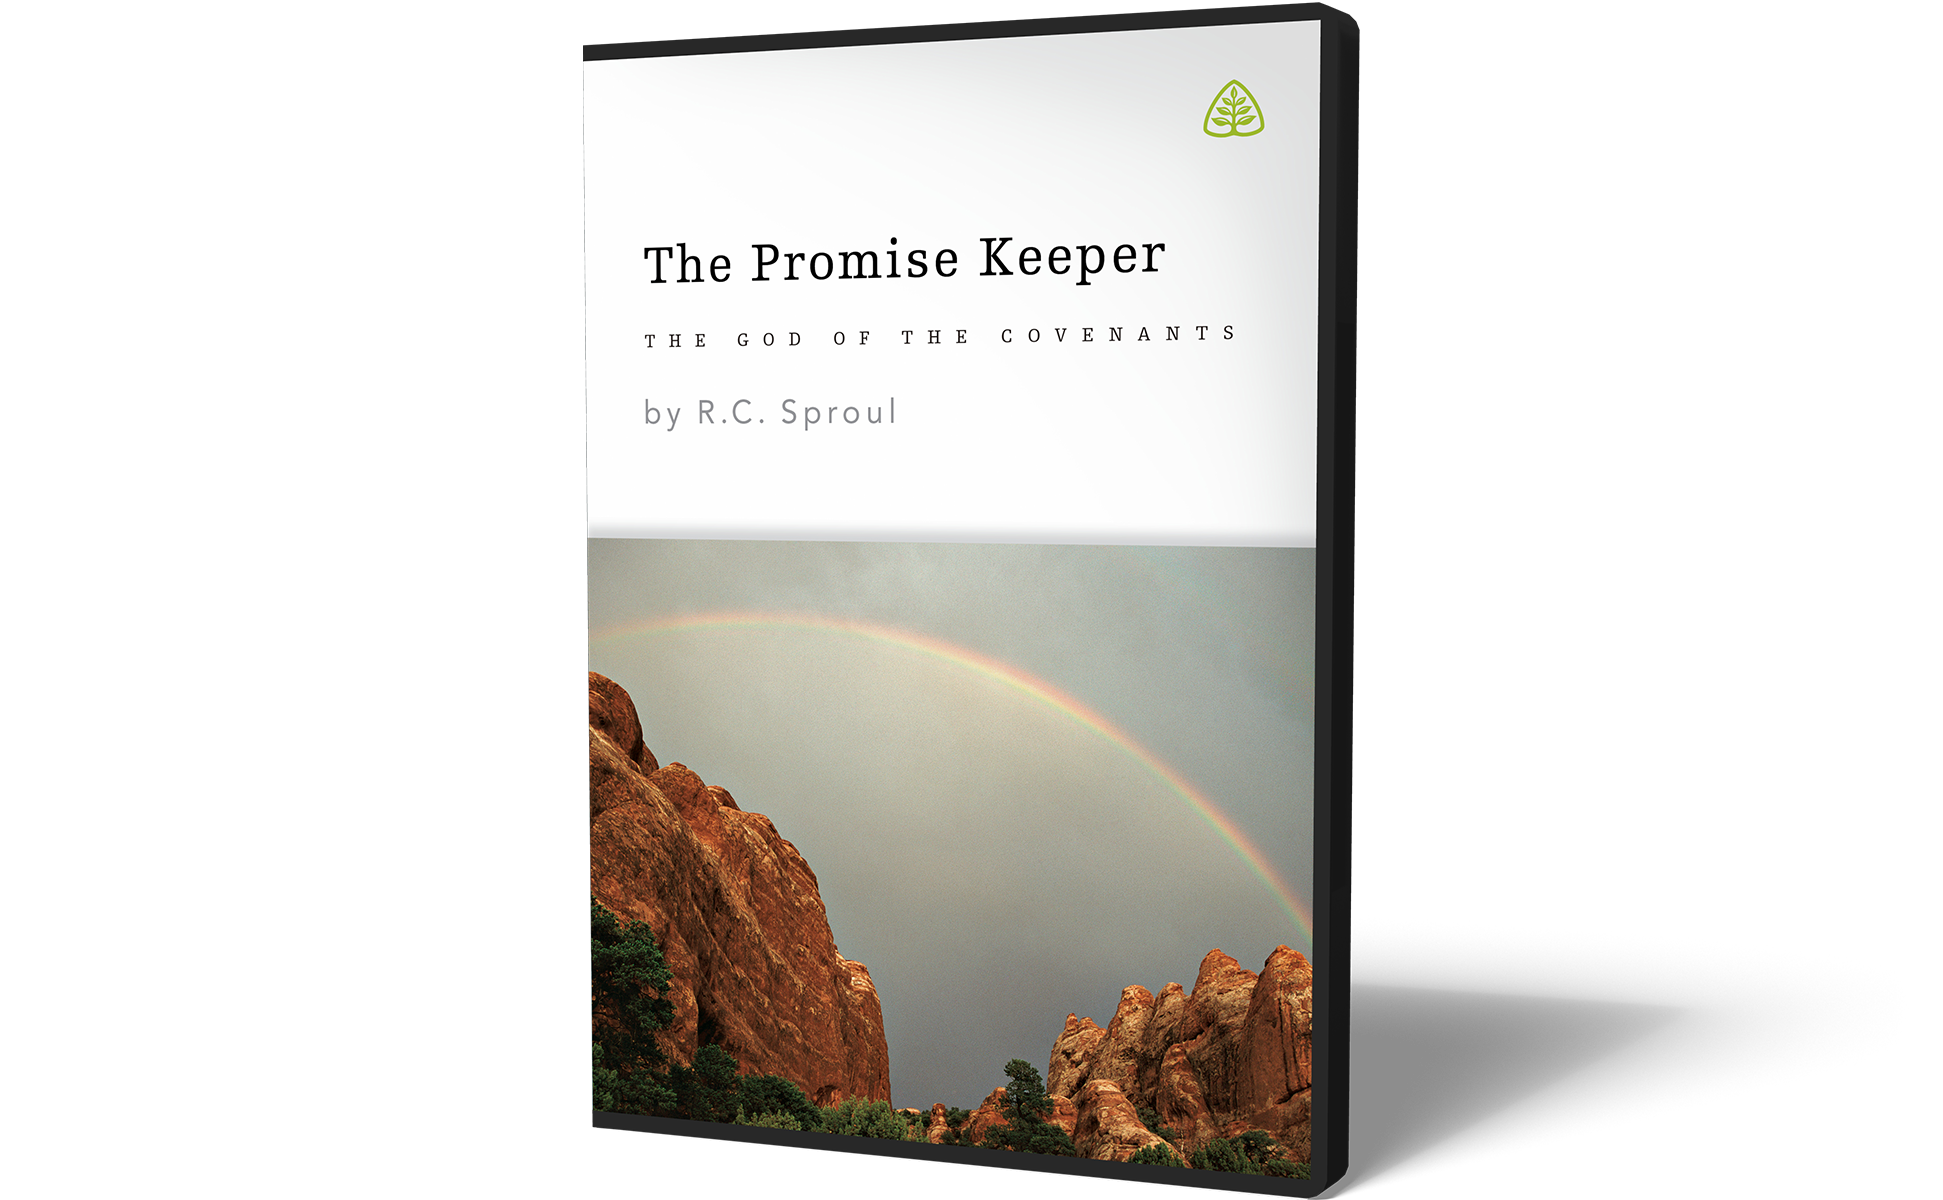 The Promise Keeper: God of the Covenants